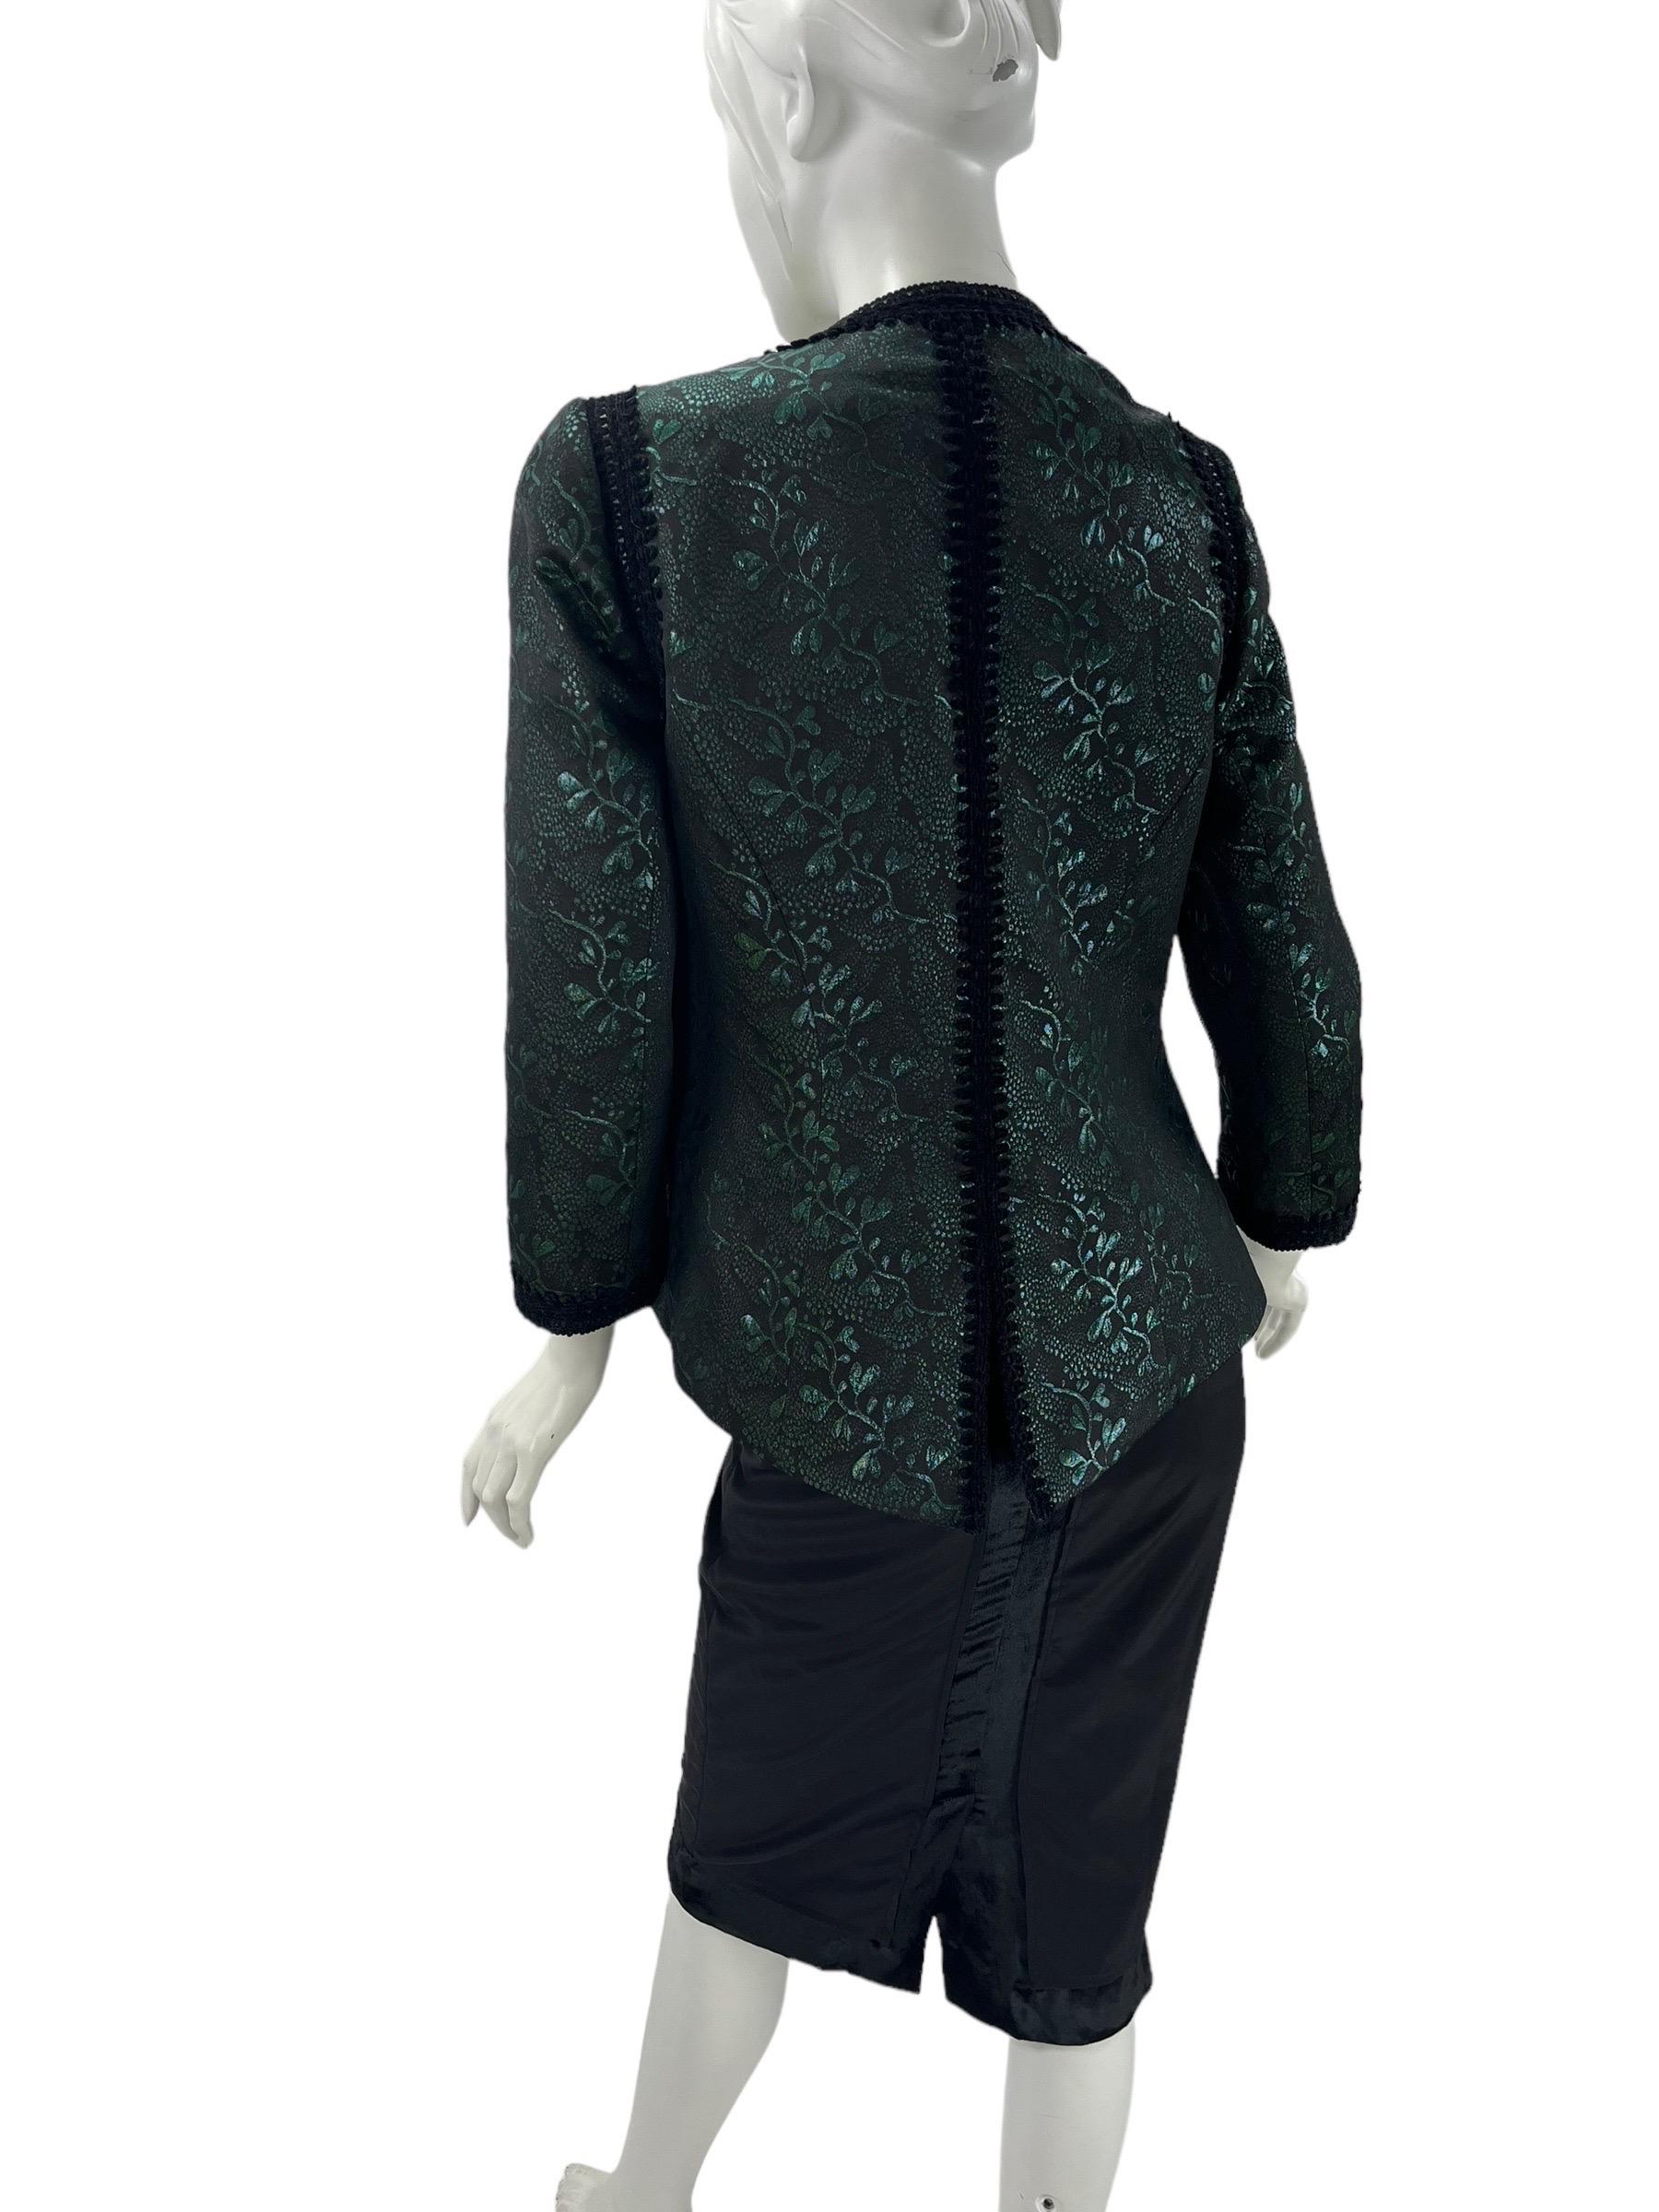 Andrew Gn Beaded & Feather Embellished Emerald Green Evening Blazer Jacket Fr 44 For Sale 1